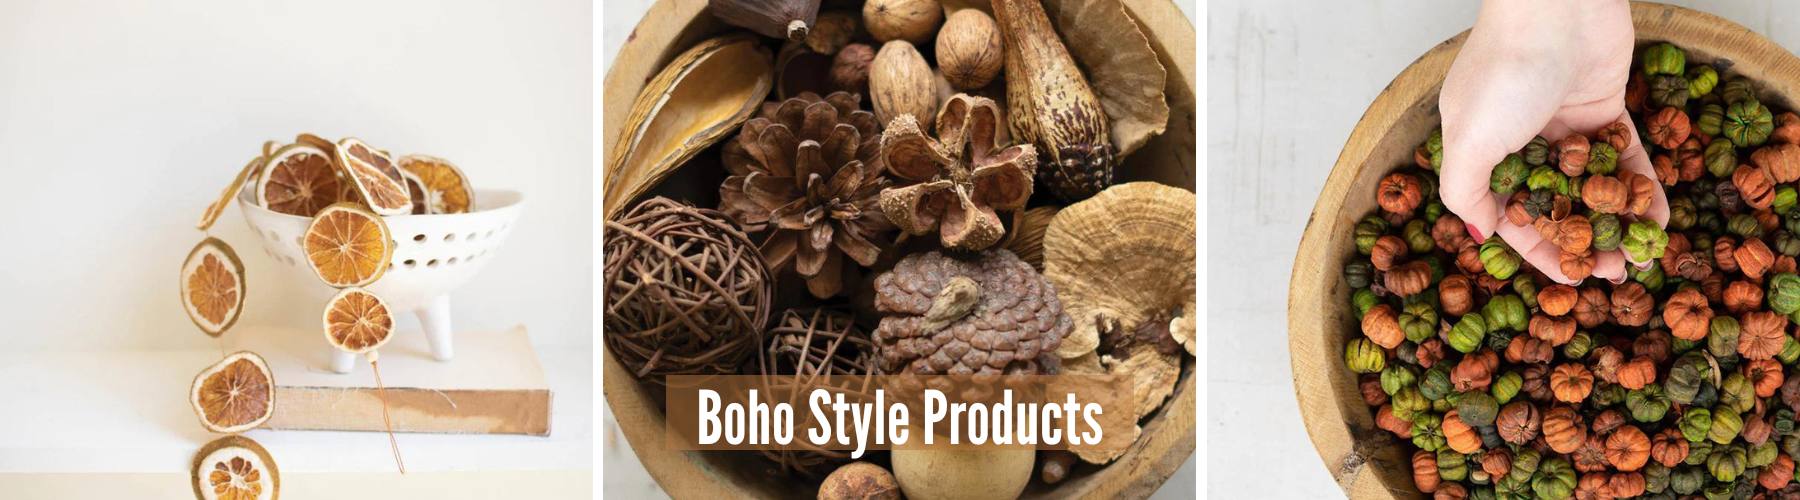 boho styles products for your home decor